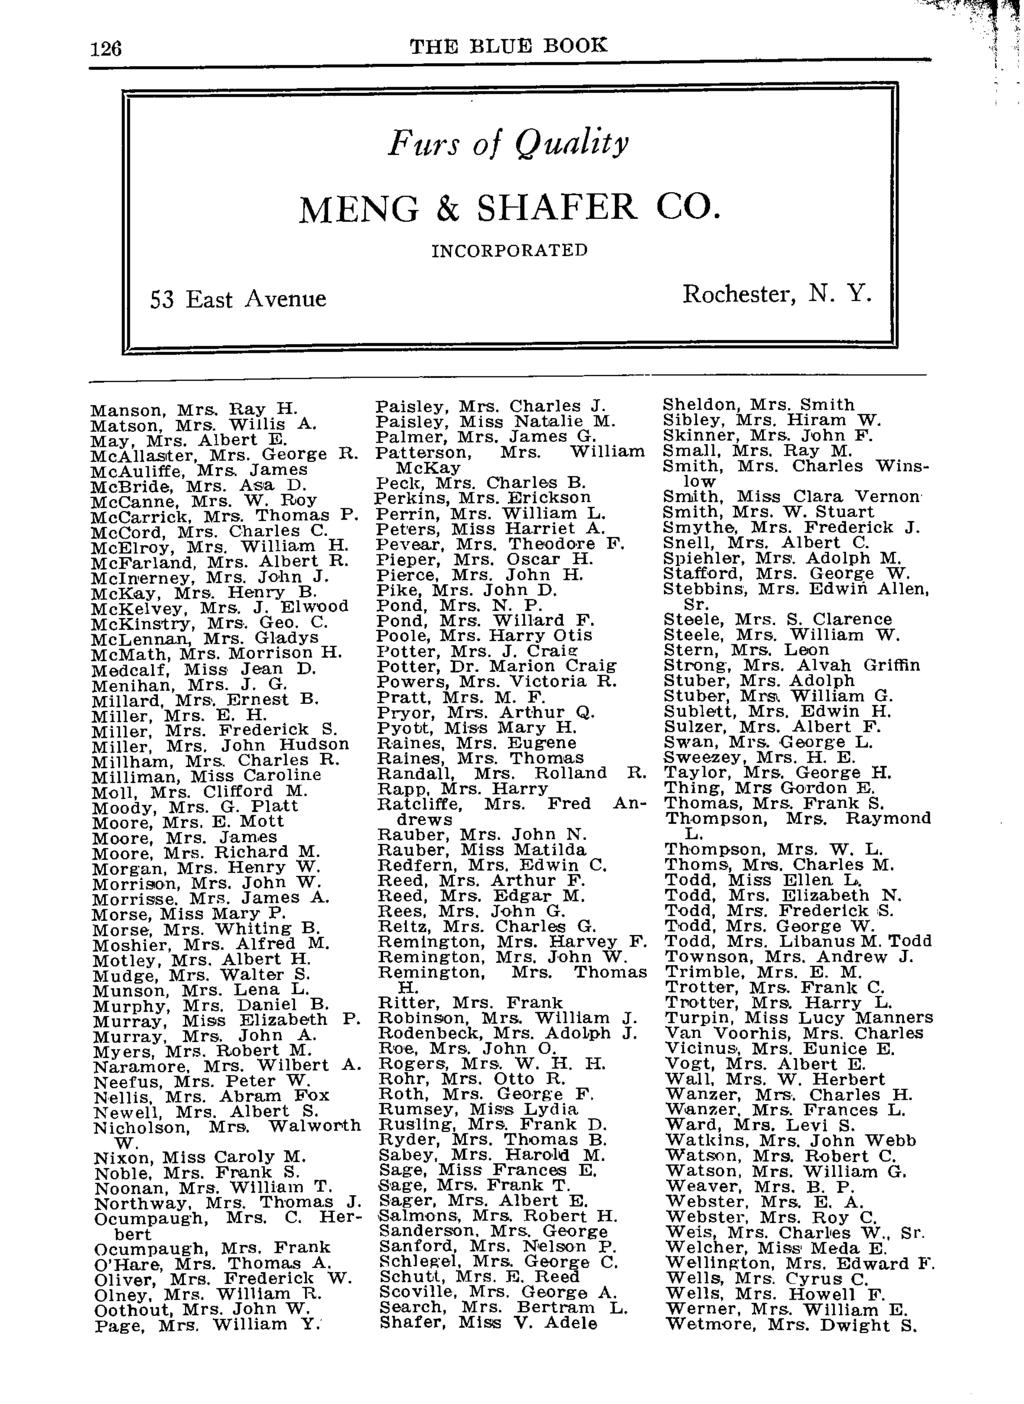 126 THE BLUE BOOK Furs of Quality MENG & SHAFER CO. INCORPORATED 53 East Avenue Rochester, N. Y. Manson, Mrs. Ray H. Matson, Mrs. Willis A. May, Mrs. Albert E. Paisley, Mrs. Charles J.